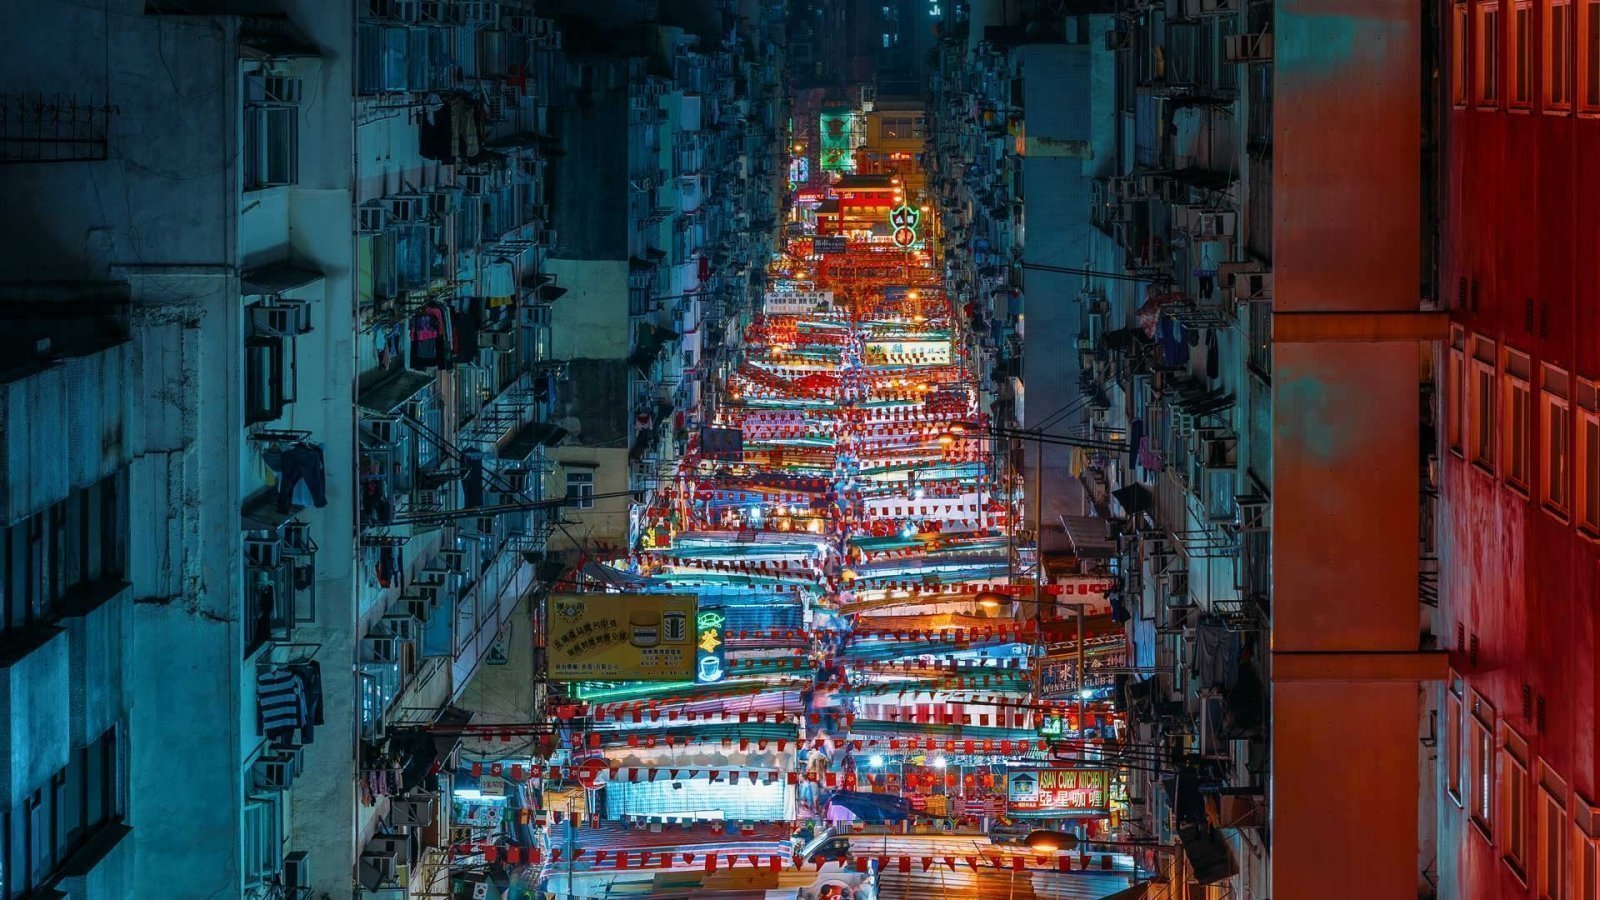 Things to do in Hong Kong - Night Market at Temple Str.